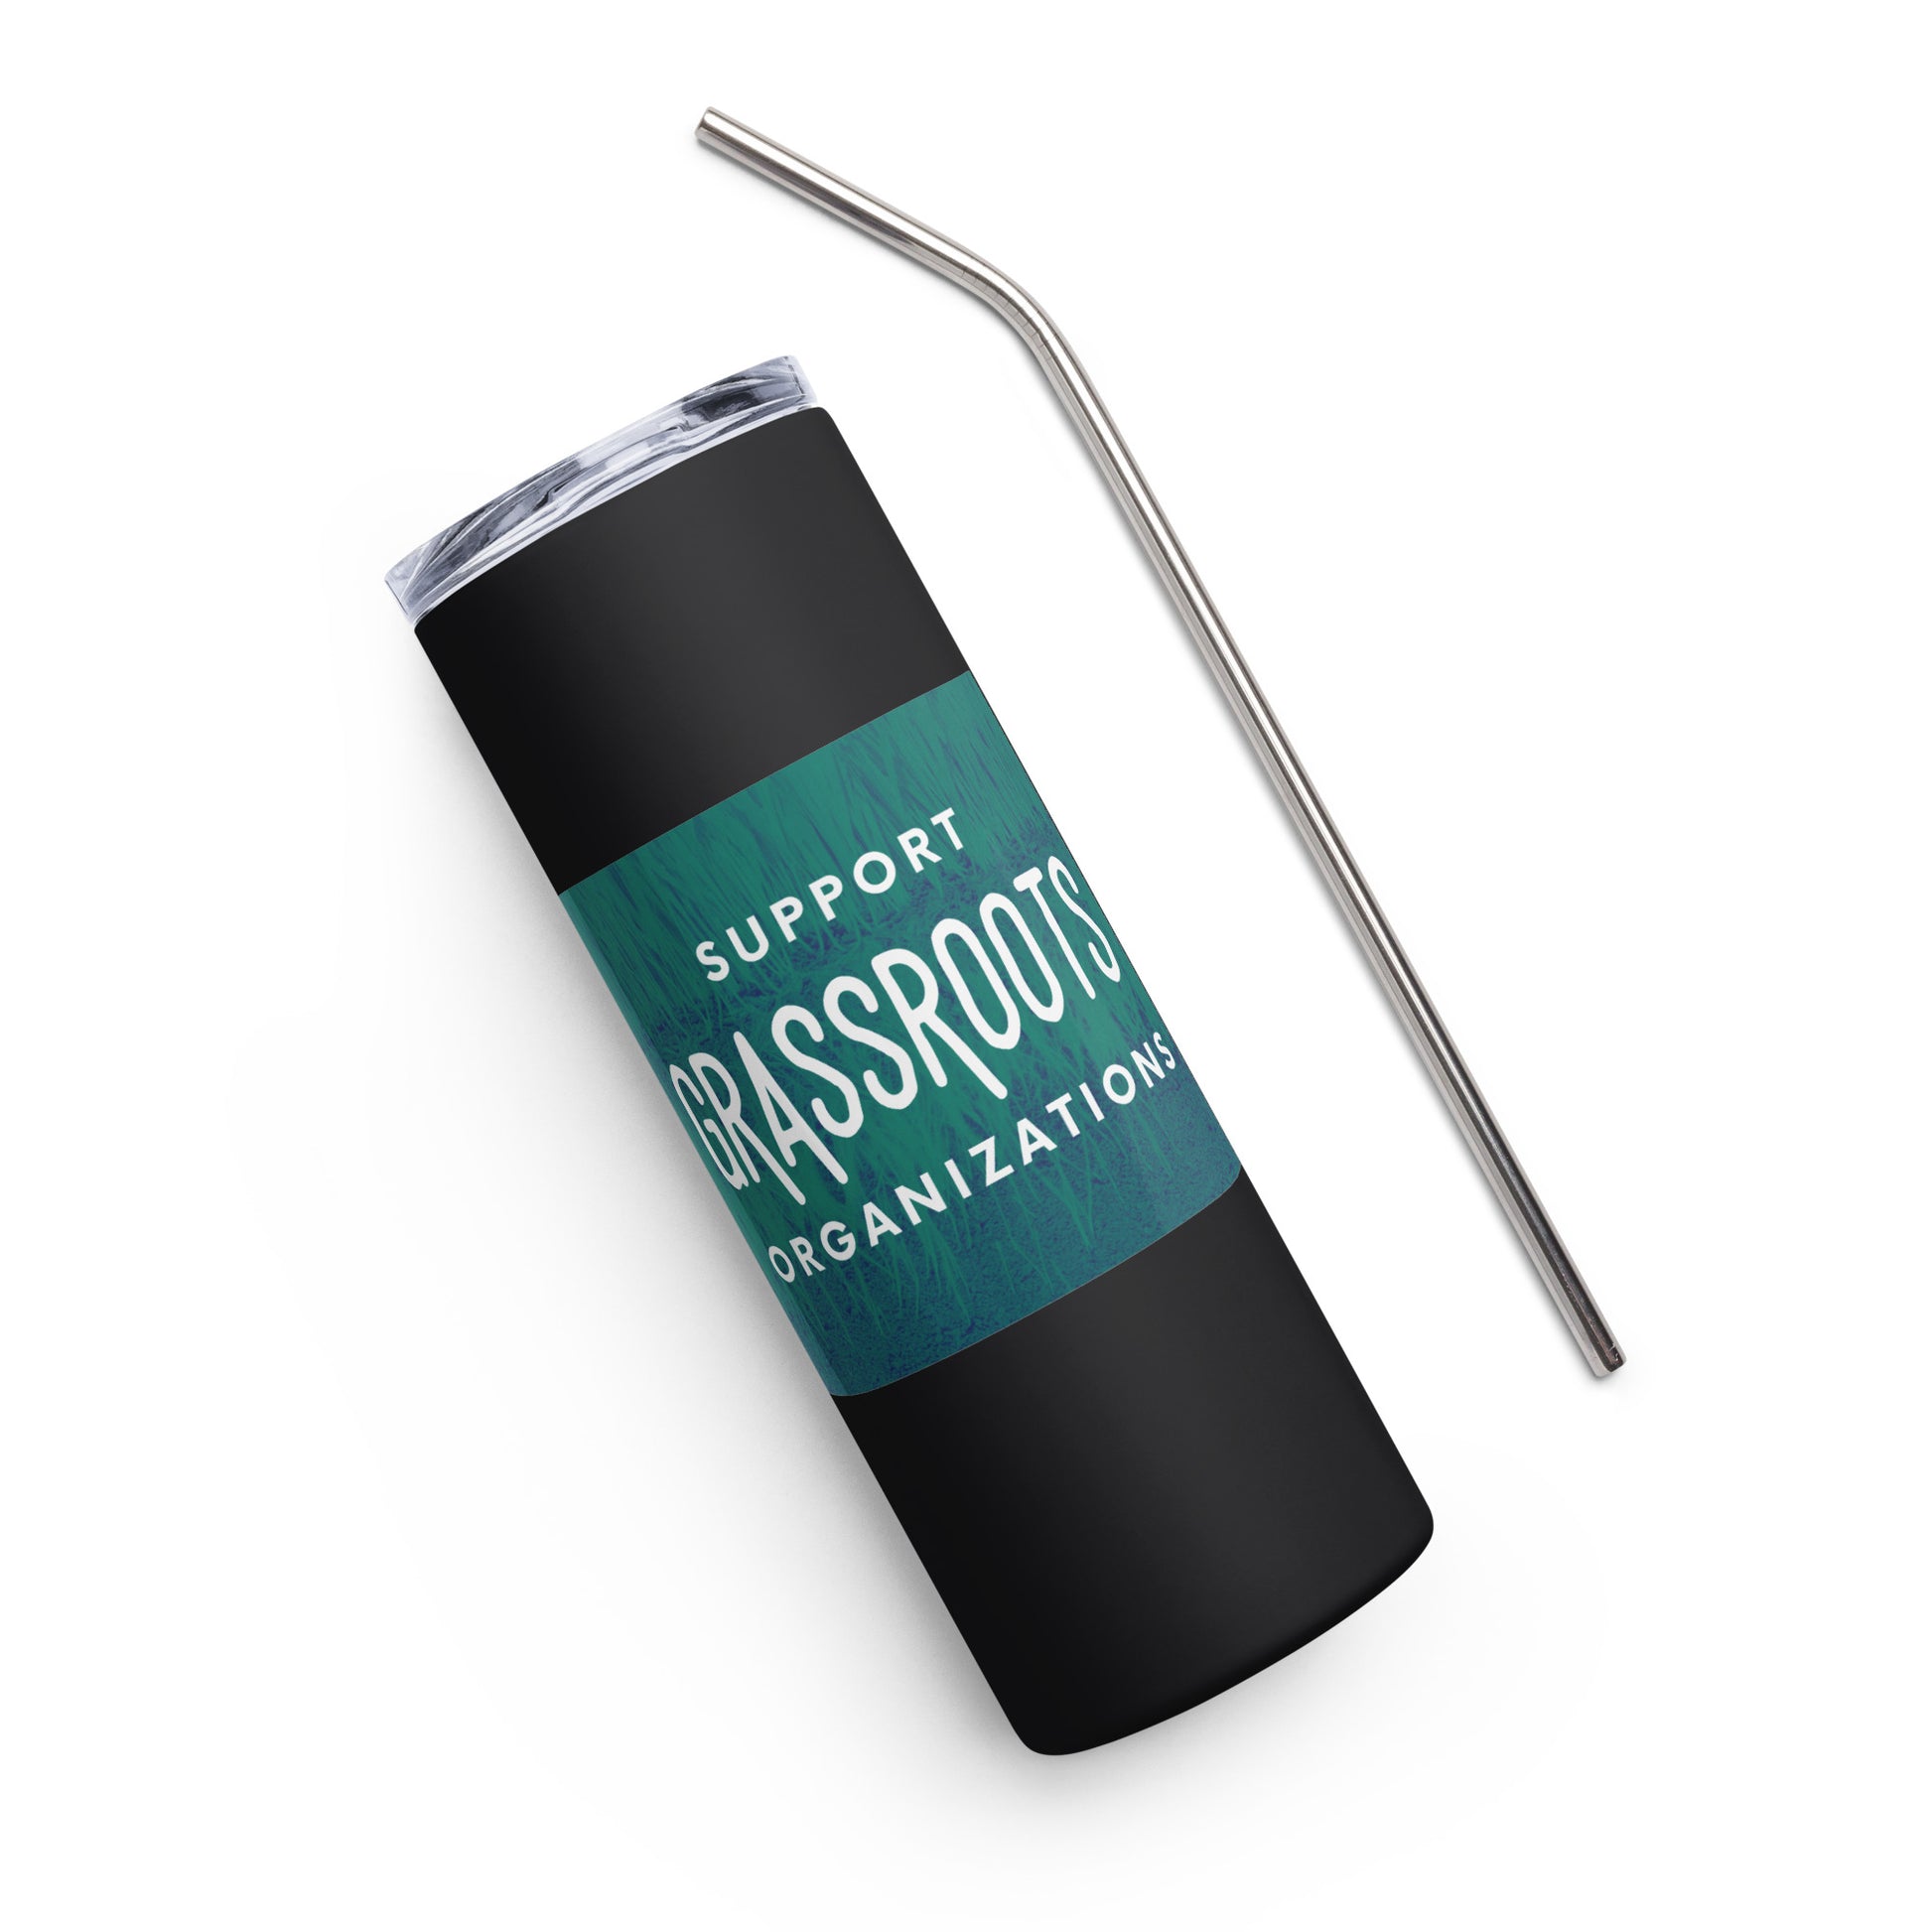 Fund Grassroots Organizations Stainless steel tumbler-recalciGrant